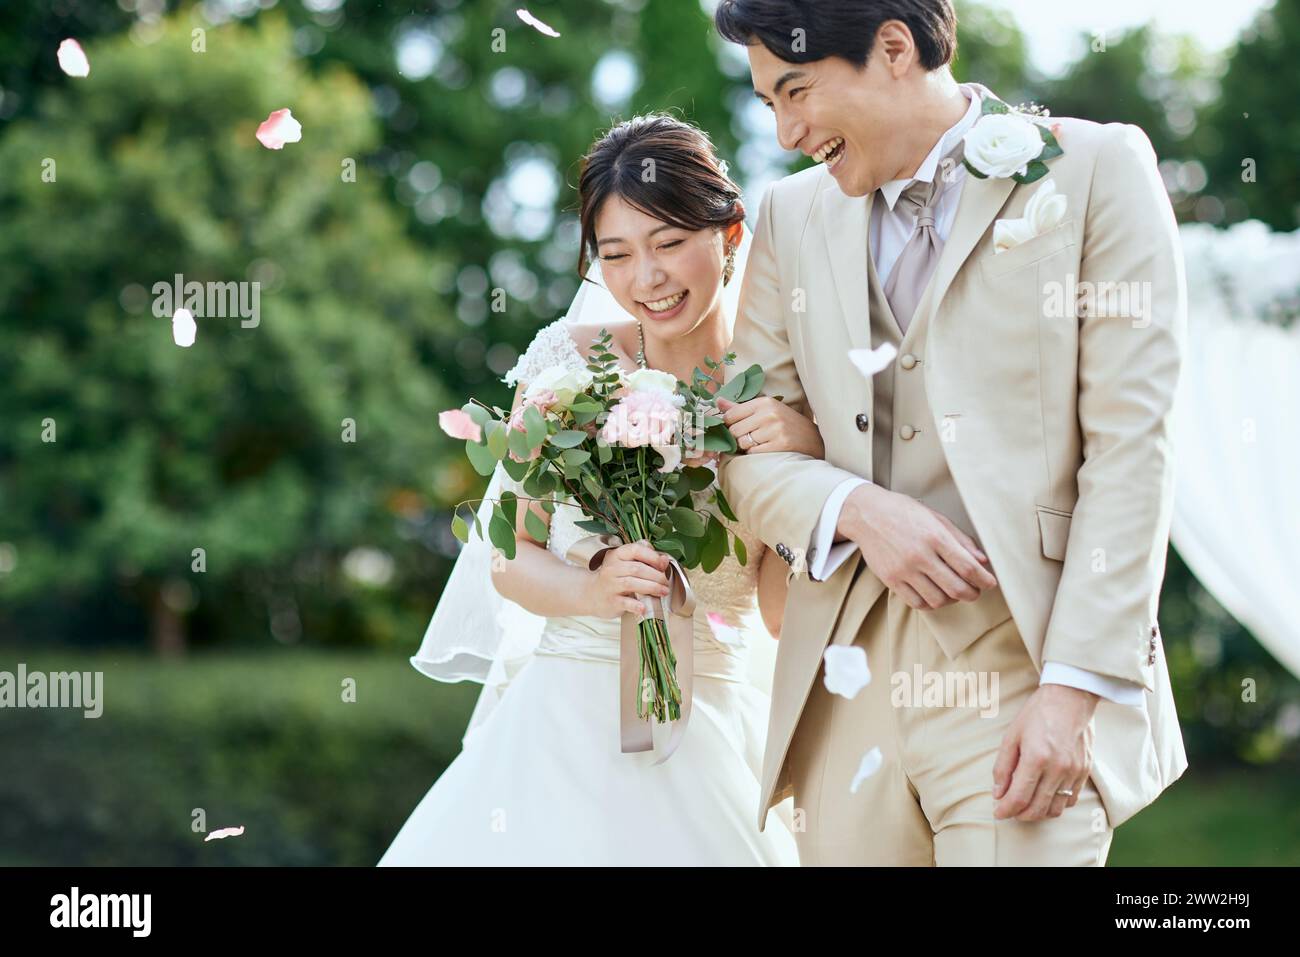 A newly married couple walking through a field with petals falling Stock Photo